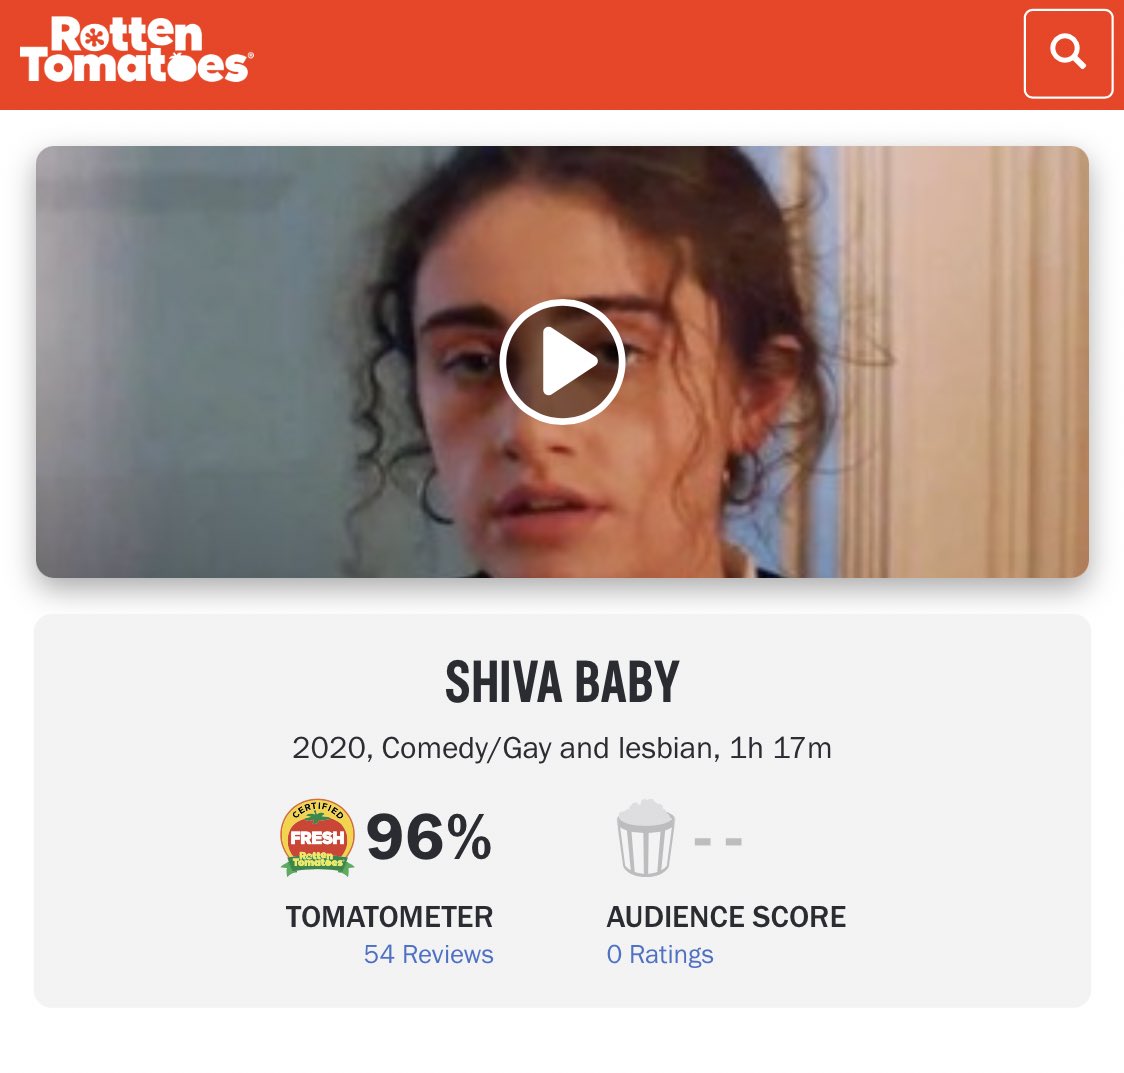 Emma Seligman's SHIVA BABY starring Rachel Sennott is certified fresh with a 96% rating on Rotten Tomatoes